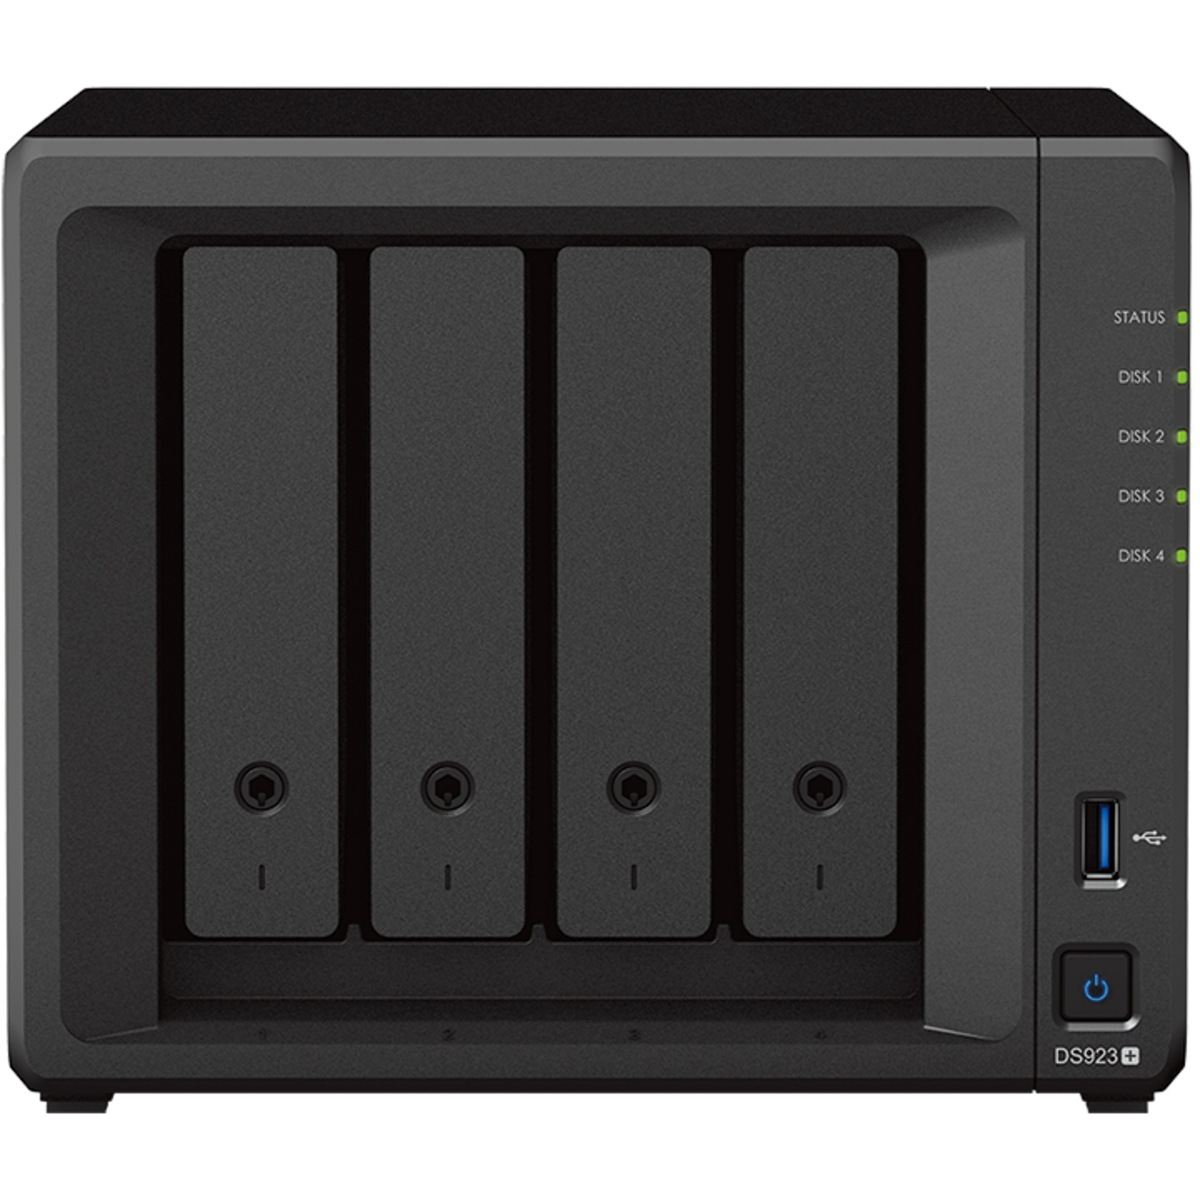 Synology DiskStation DS923+ 18tb 4-Bay Desktop Multimedia / Power User / Business NAS - Network Attached Storage Device 3x6tb Western Digital Red Plus WD60EFPX 3.5 5640rpm SATA 6Gb/s HDD NAS Class Drives Installed - Burn-In Tested - ON SALE - FREE RAM UPGRADE DiskStation DS923+